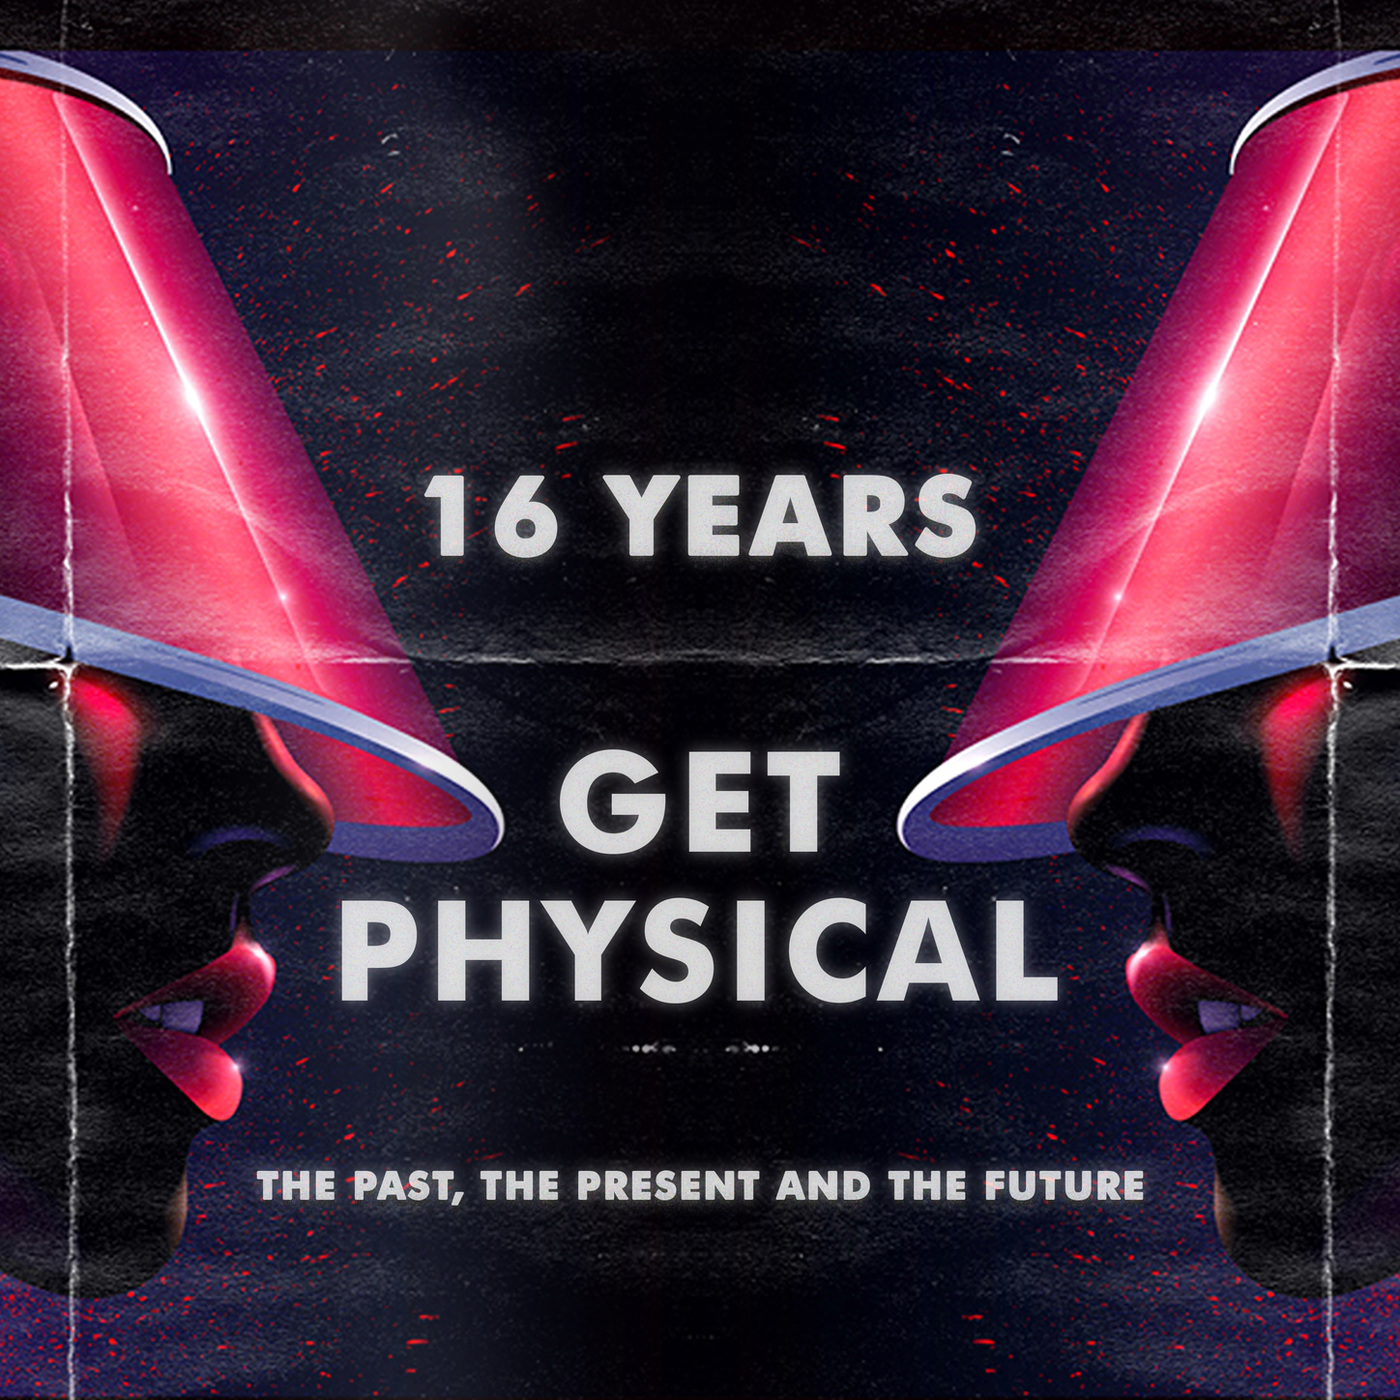 VA - 16 Years Get Physical - The Past, The Present and The Future / Get Physical Music